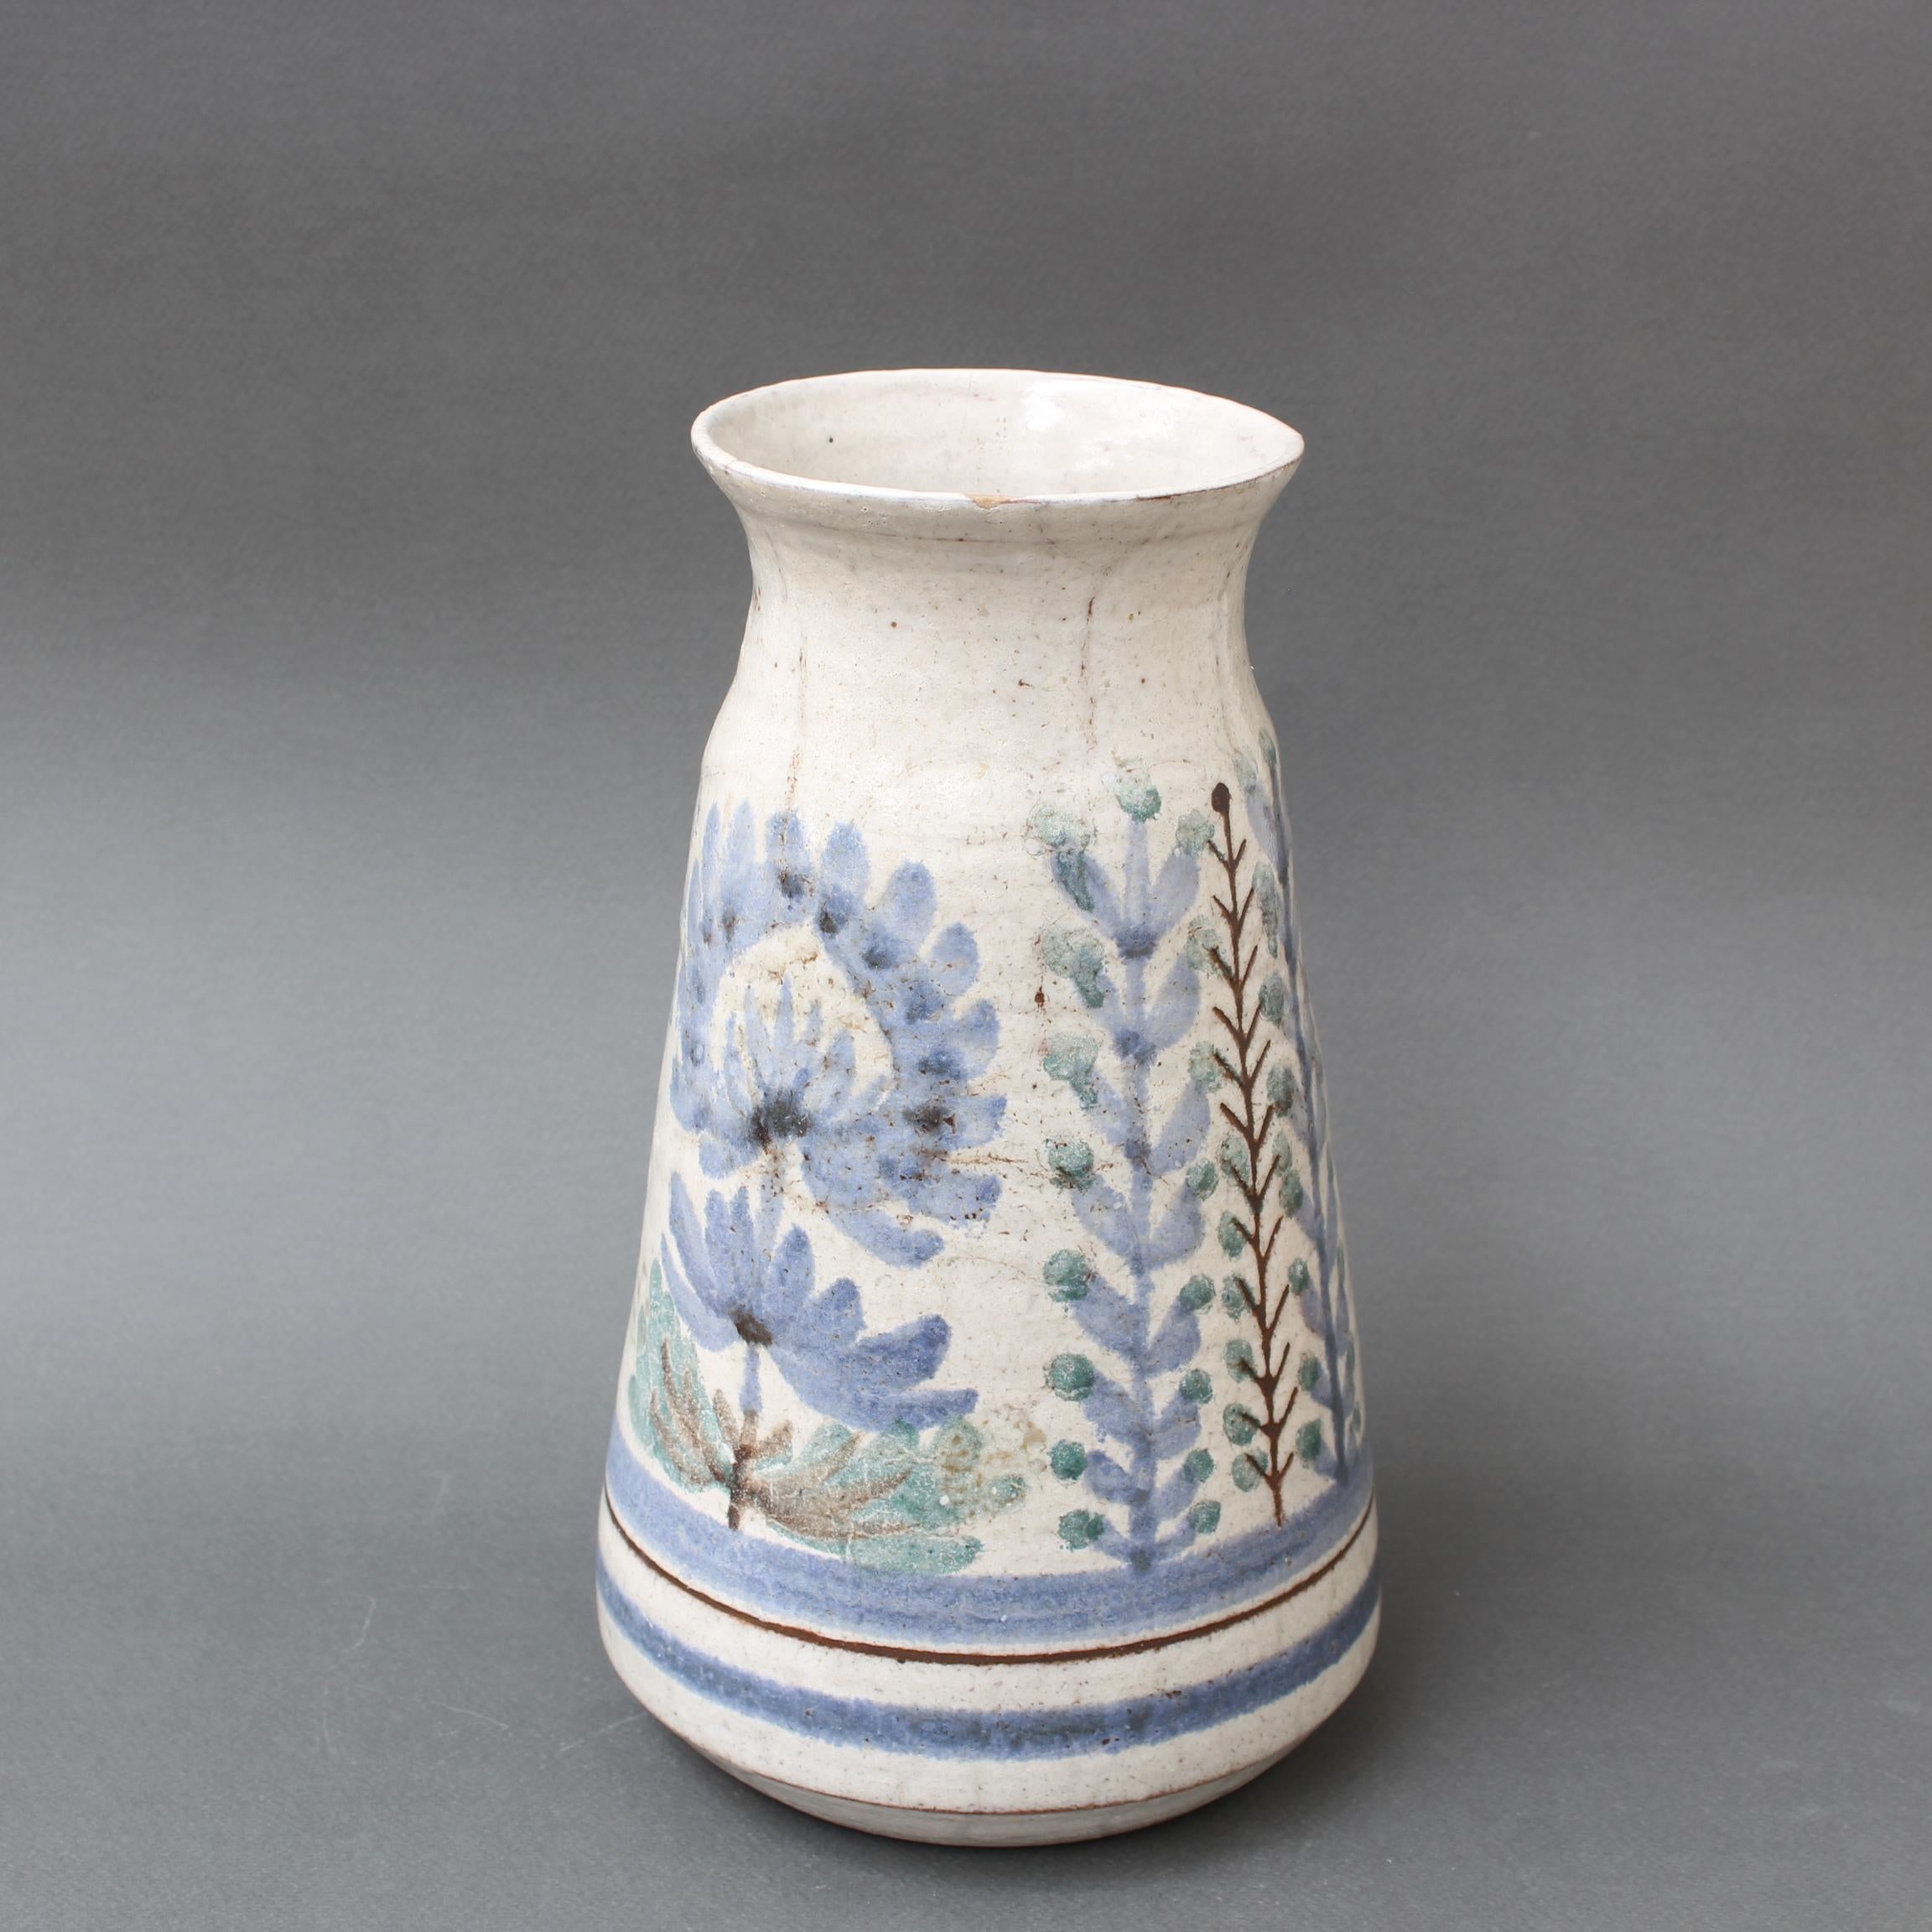 A French Vintage ceramic vase by Le Mûrier (circa 1960s). This sizeable yet elegant flower vase is a delightful work of art in the trademark style of Gustave Reynaud and Le Mûrier. On the rustic exterior you will find charming flowers with blue